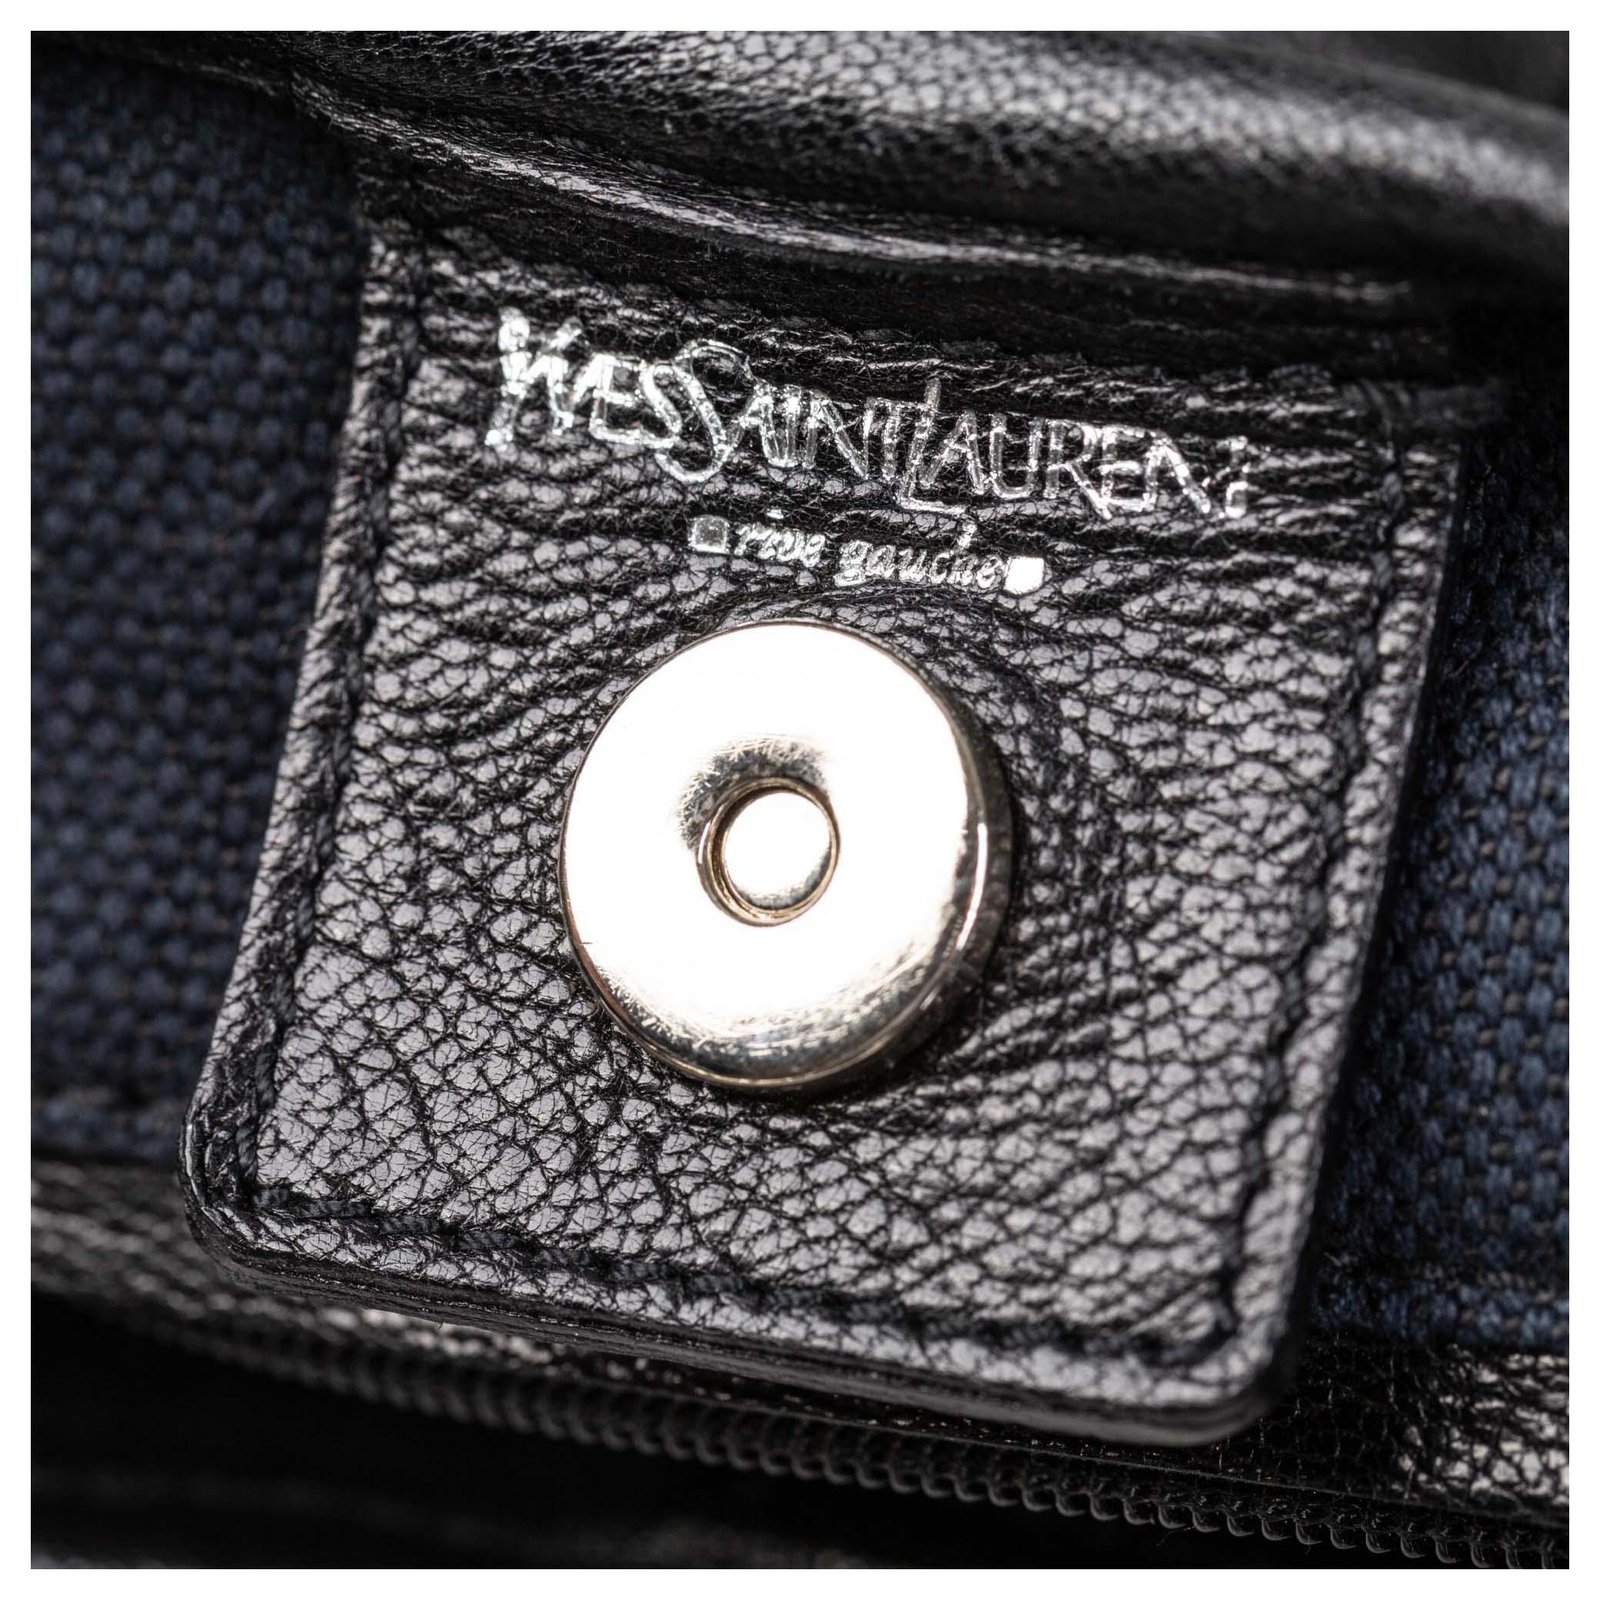 YSL- Mombasa Leather Bag- Matiell Consignment Boutique